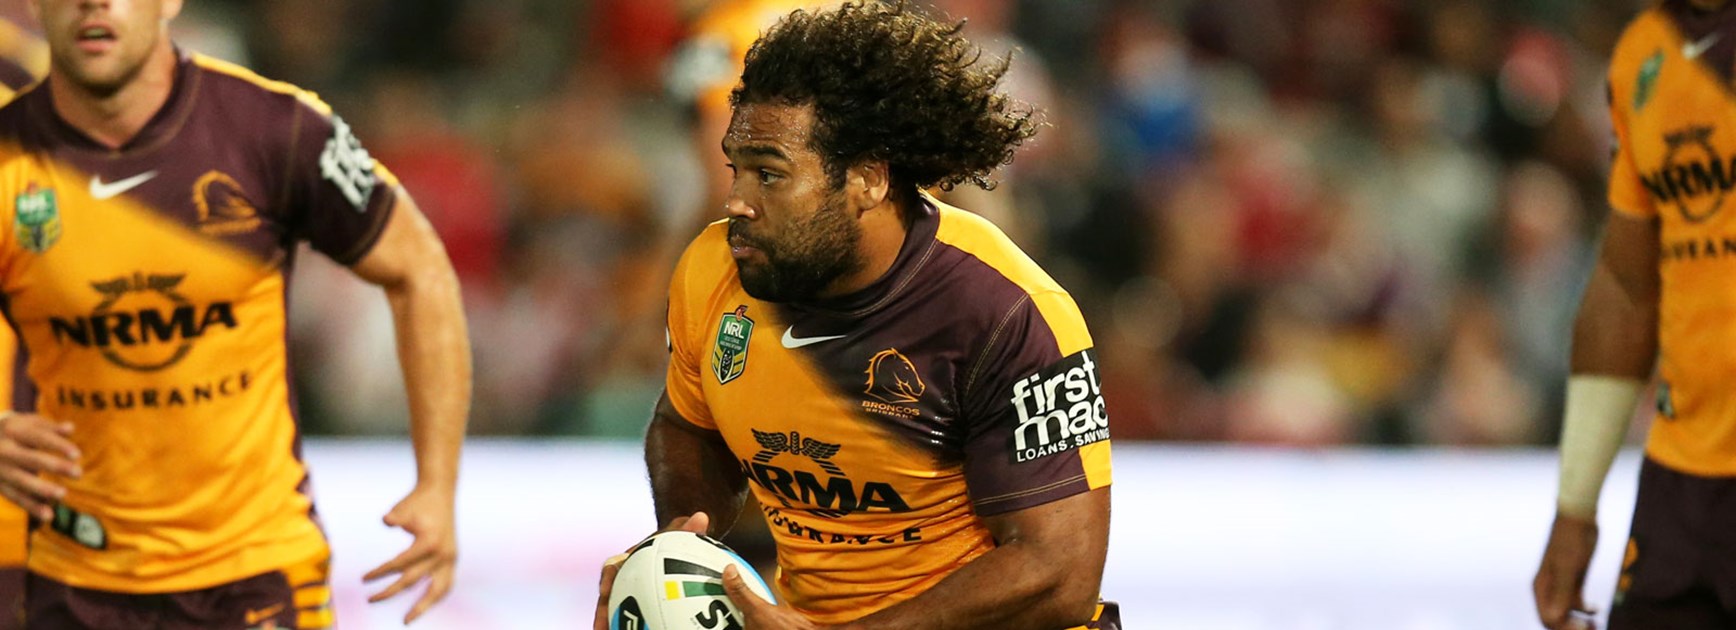 Sam Thaiday in action for the Broncos during their Round 7 clash with the Dragons.